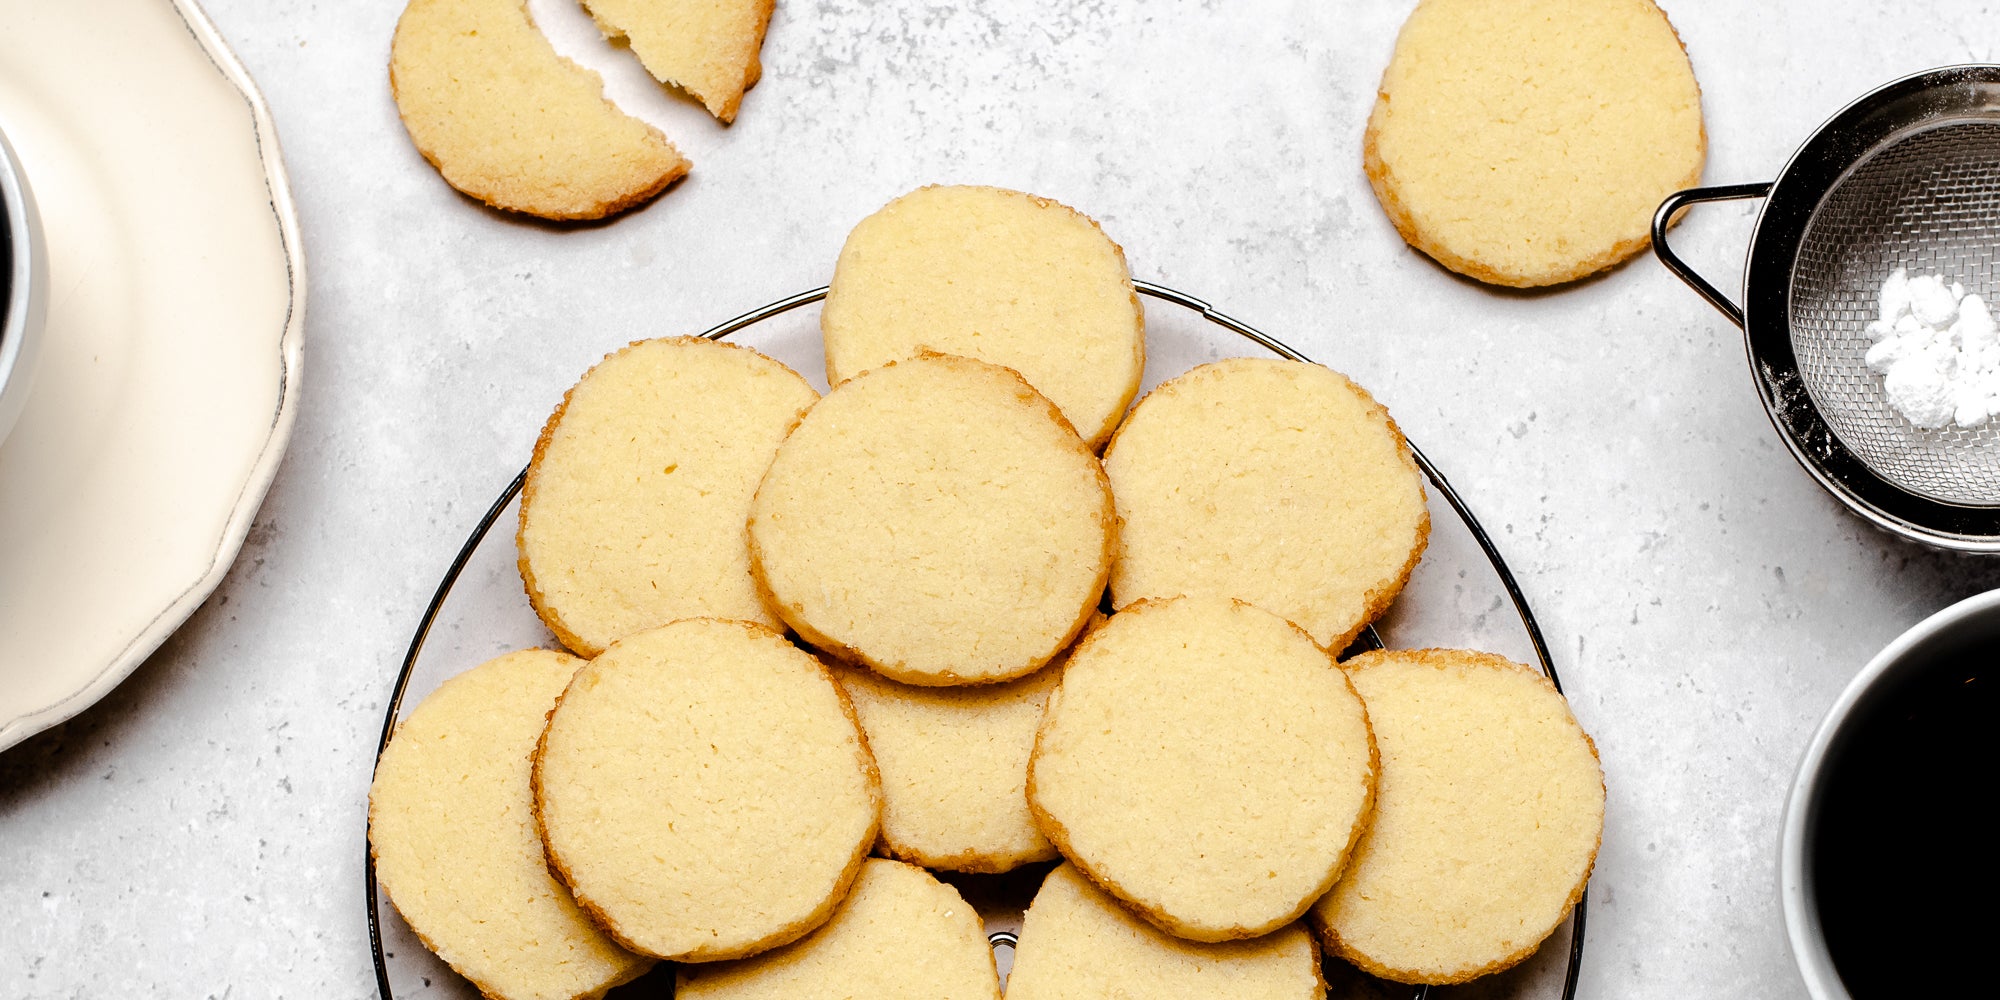 A batch of baked shortbread biscuits on a plate, next to a sieve